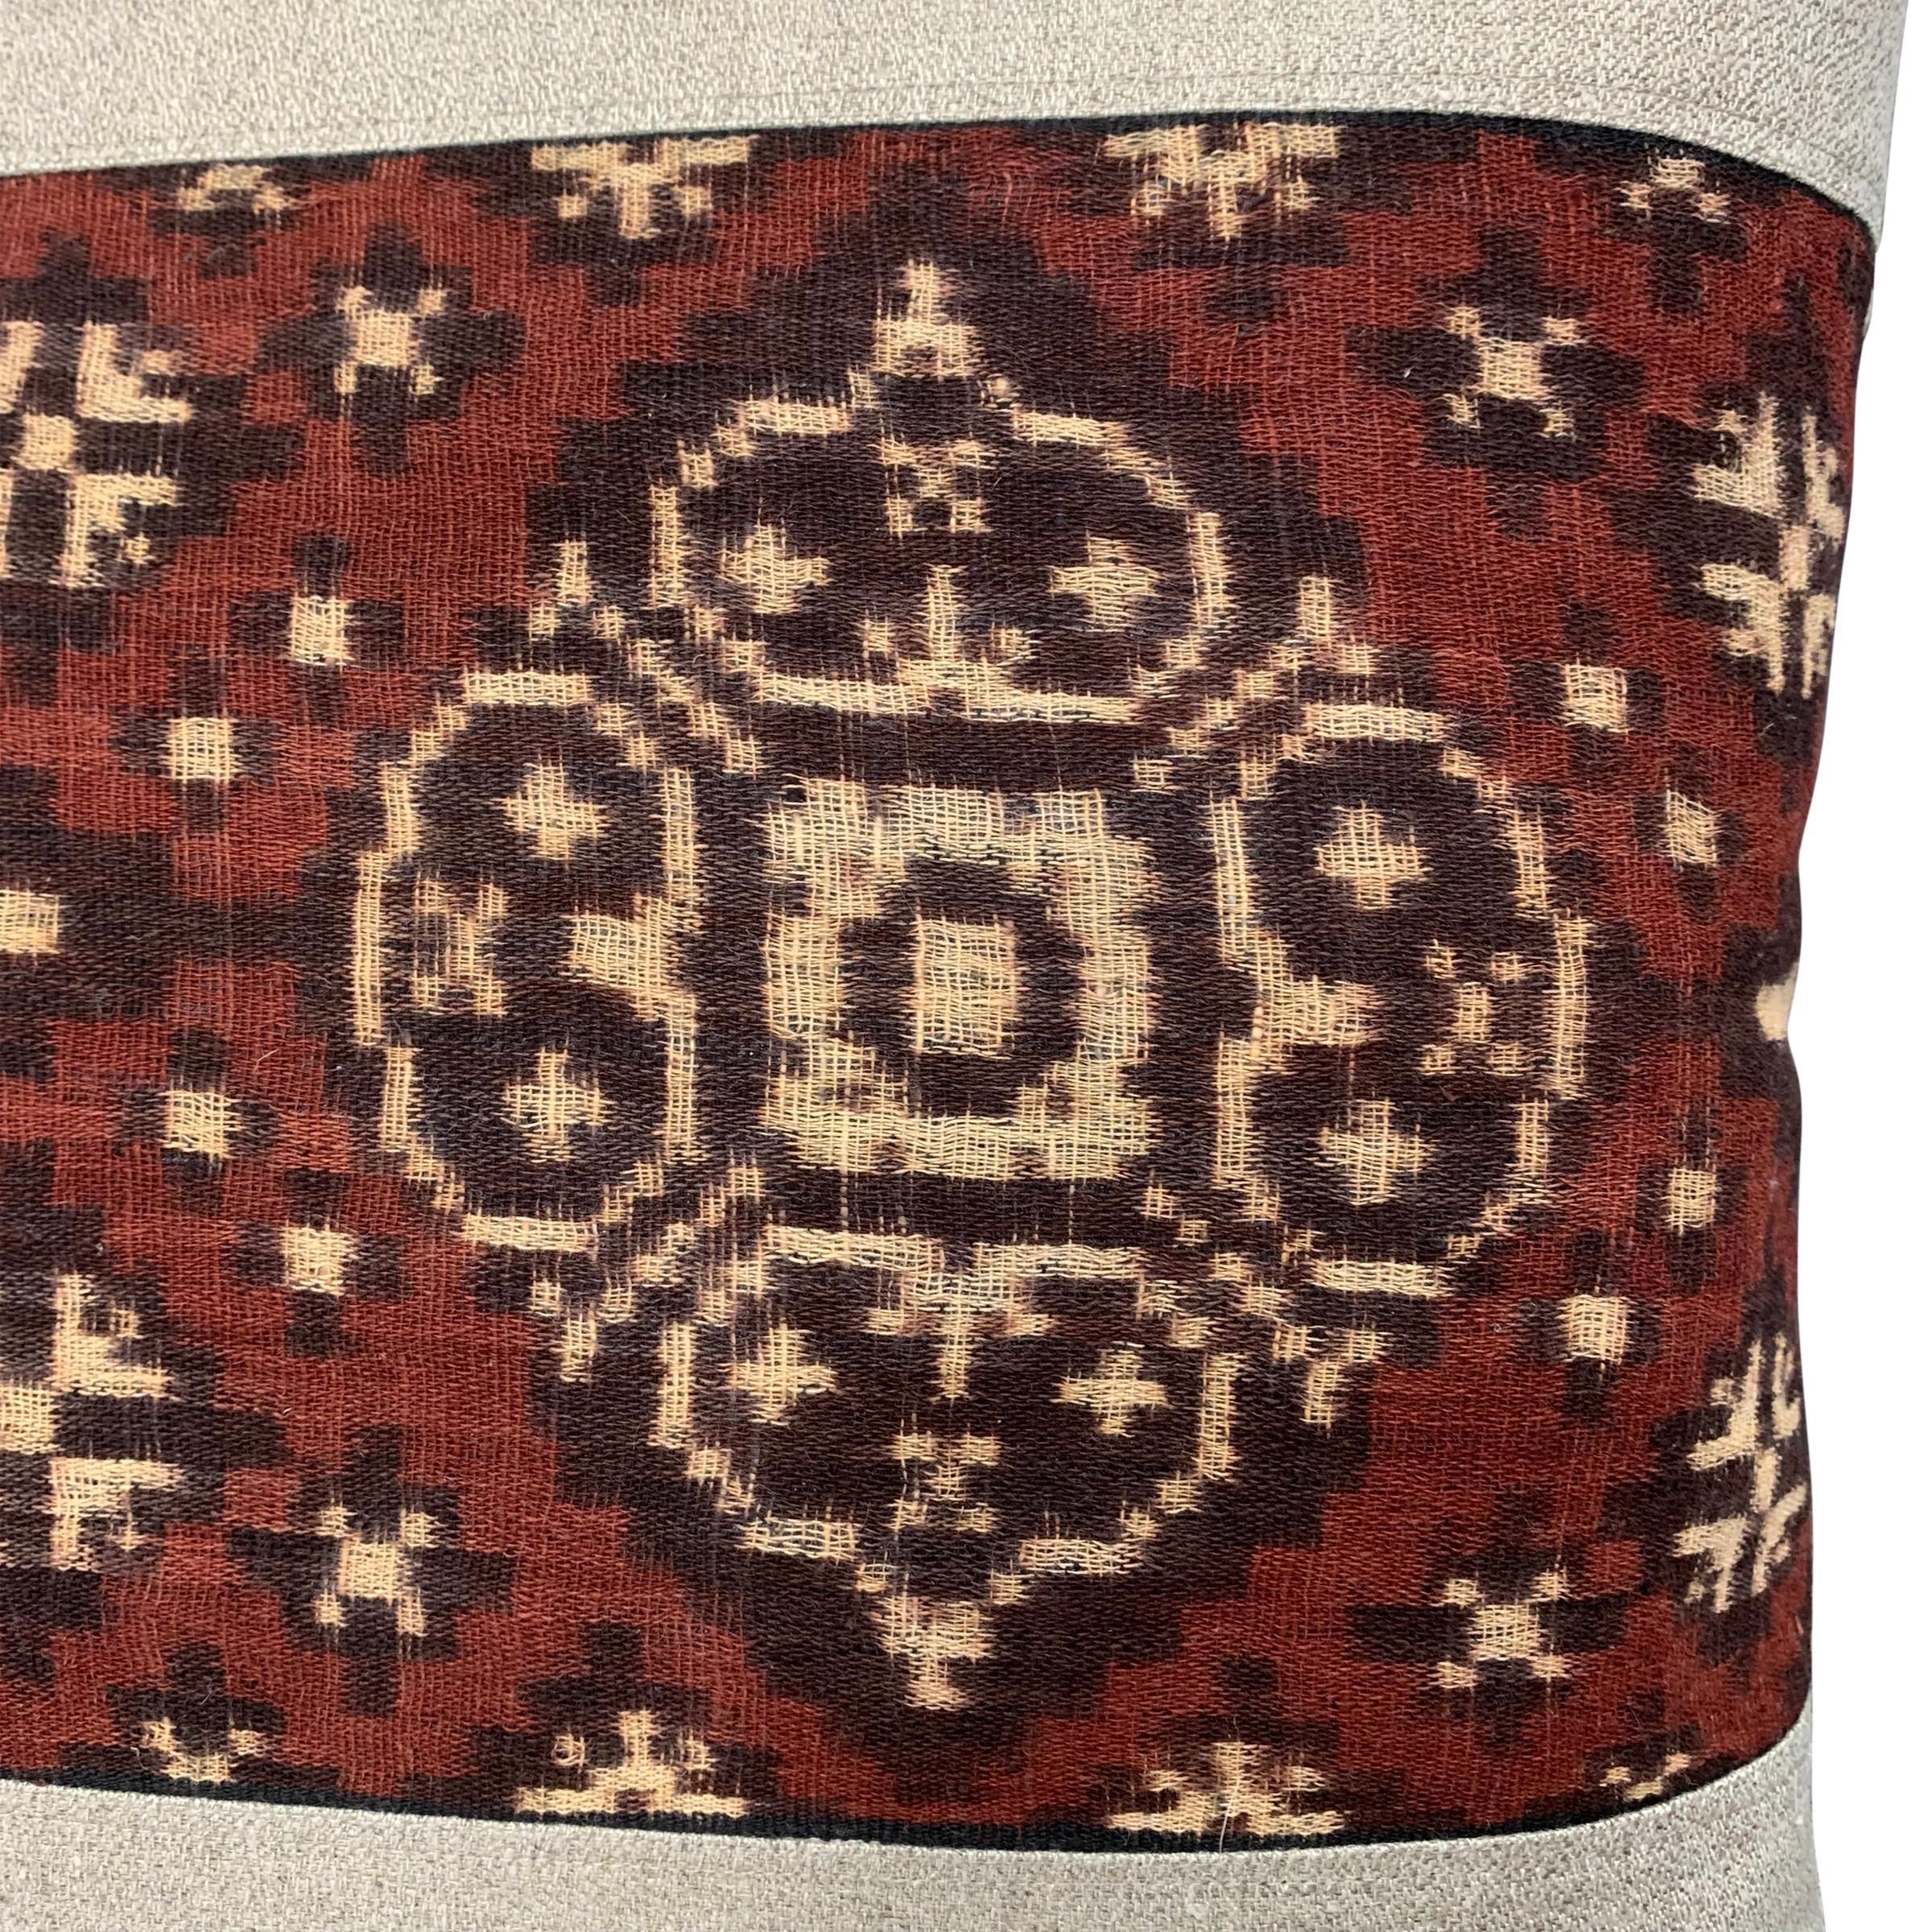 Pair of Early 20th Century Indonesian Double Ikat Pillows (Leinen)